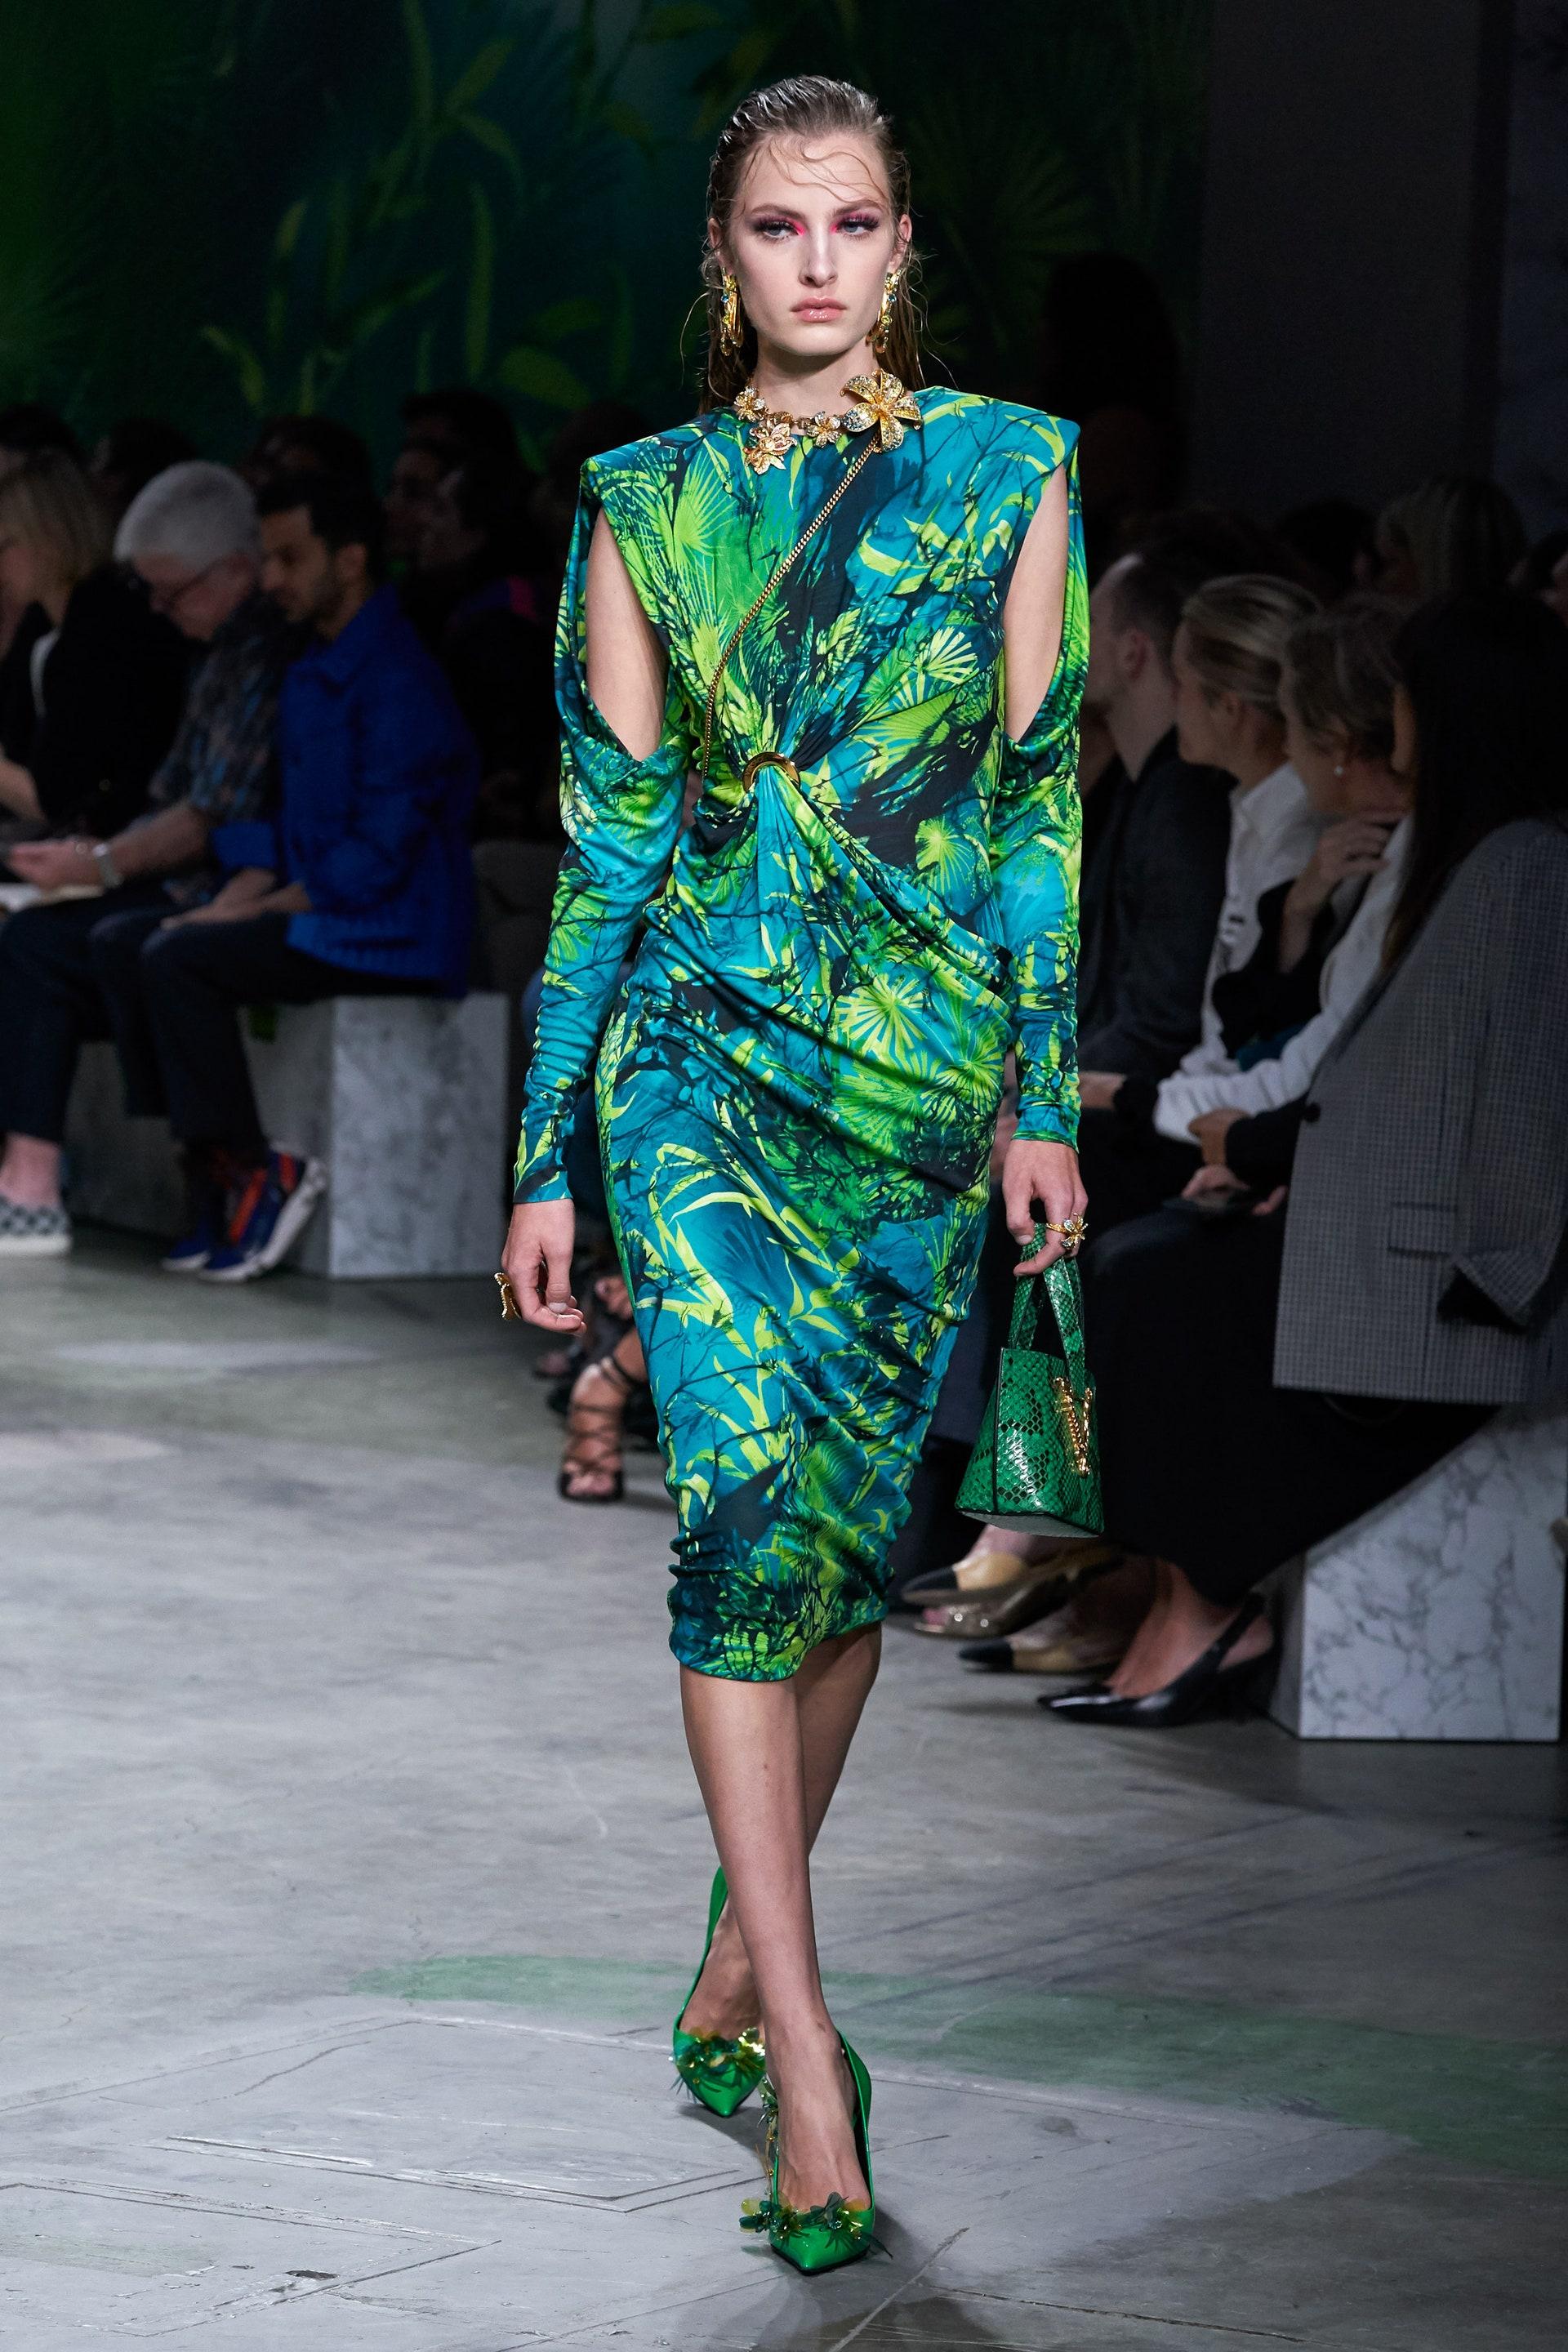 VERSACE

Collection S/S 2020 Look # 18

Green silk dress
Midi length, round neck lane, long sleeves
Cutouts on the sleeves
Gold-tone ring hardware on the waist  

Size EU 38 - 2
Made in Italy

Brand new, without tags!
PLEASE VISIT OUR STORE FOR MORE